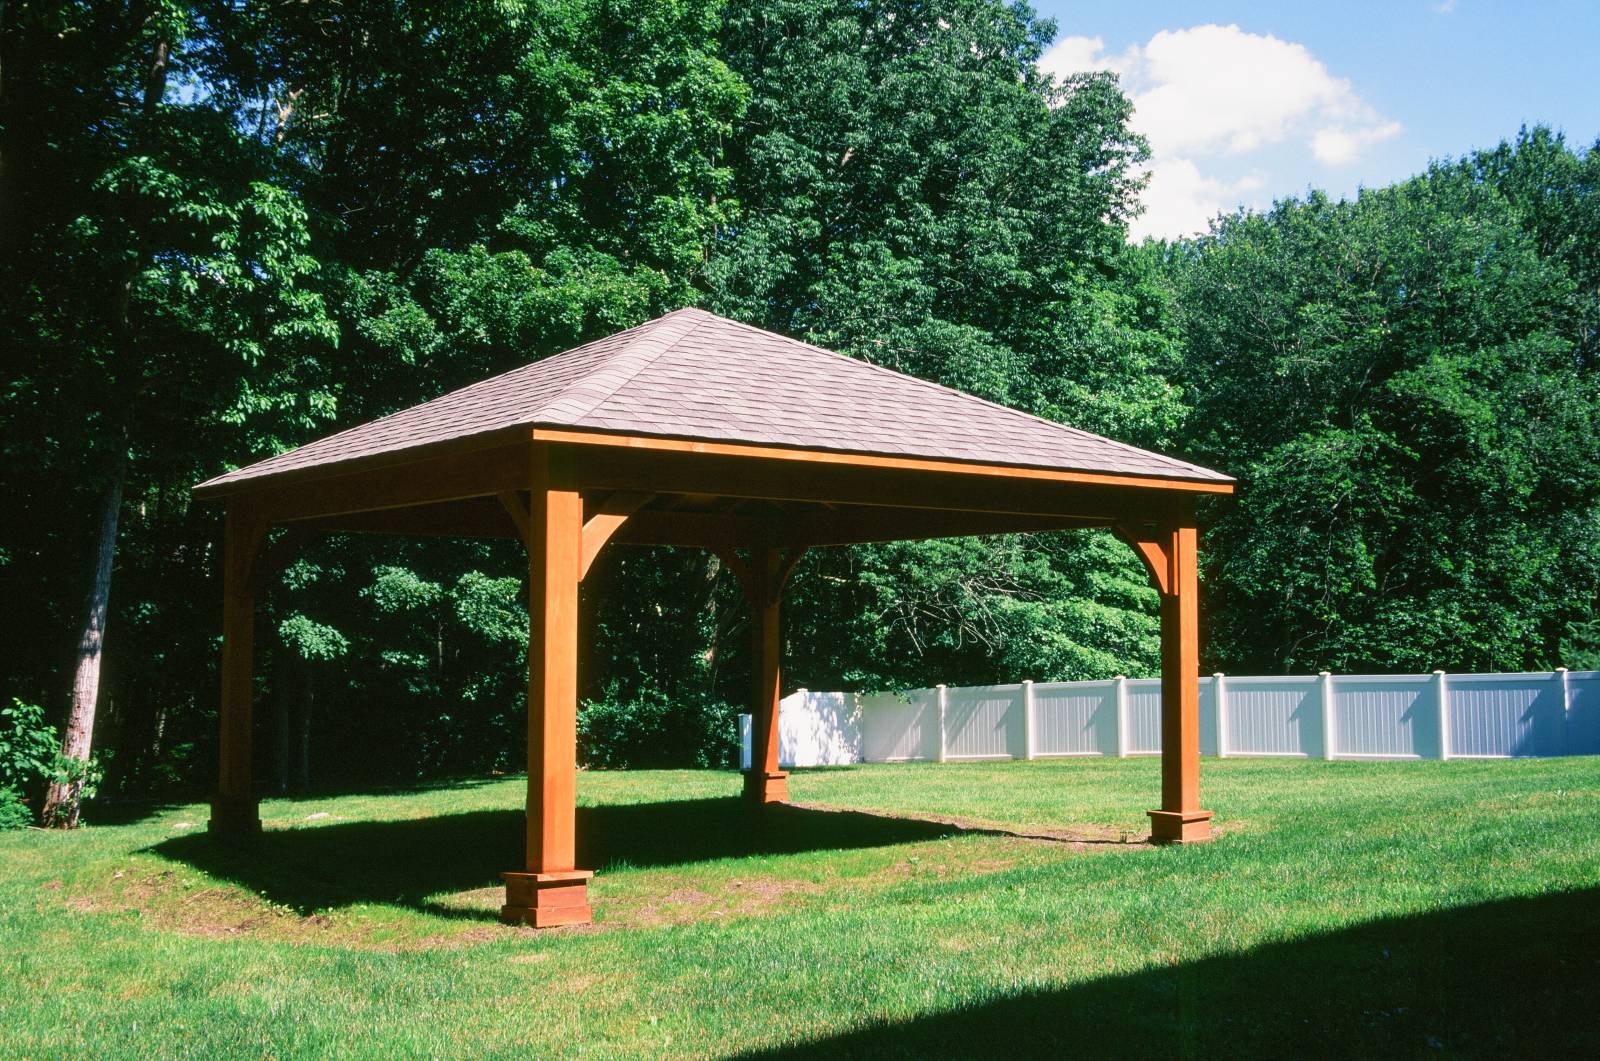 16' x 16' Easton Pavilion Shown with Options